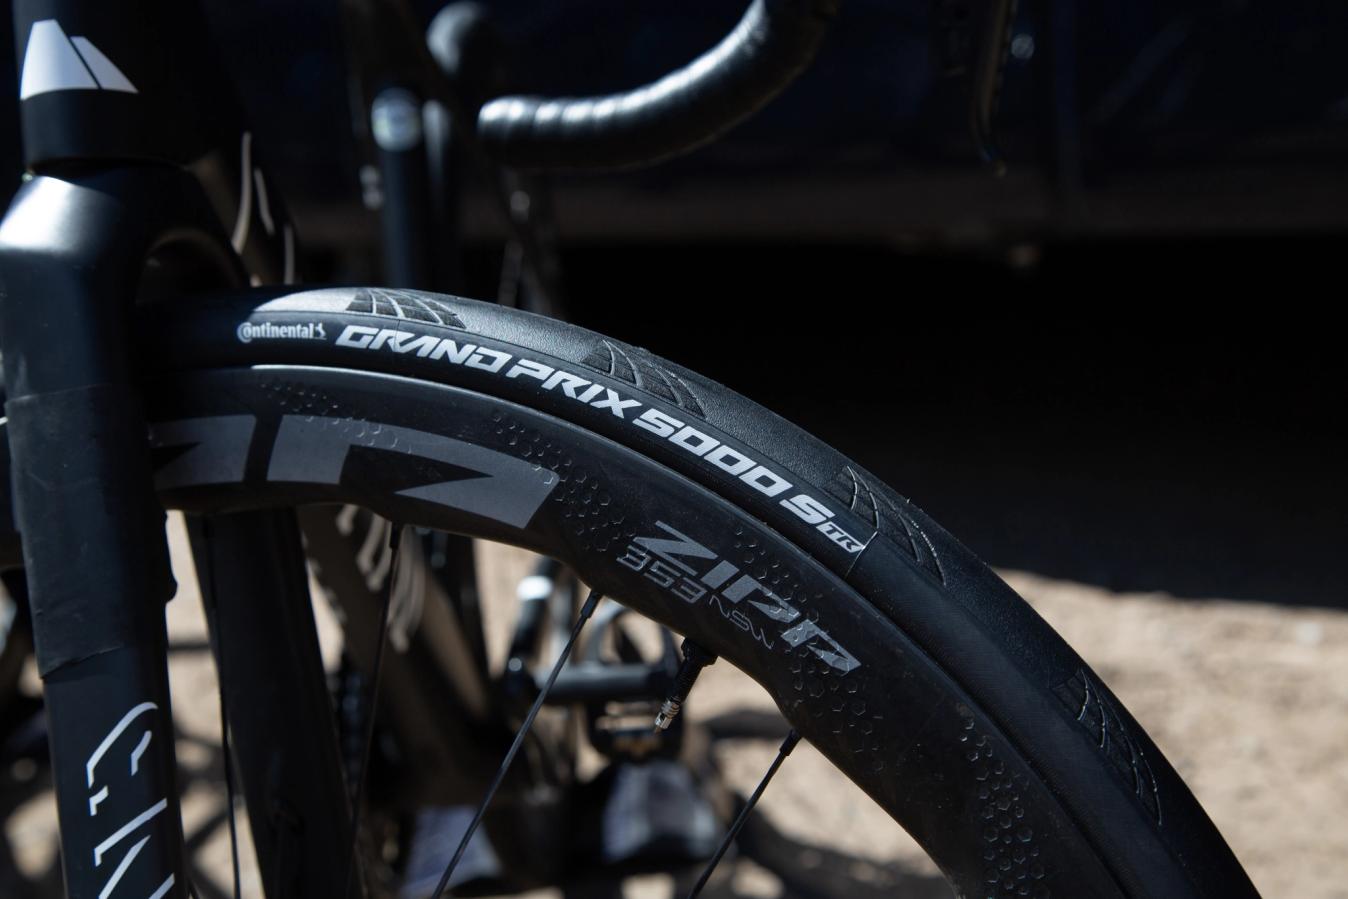 Zipp's lightest tubeless wheelset is paired with Continental GP 5000 tyres